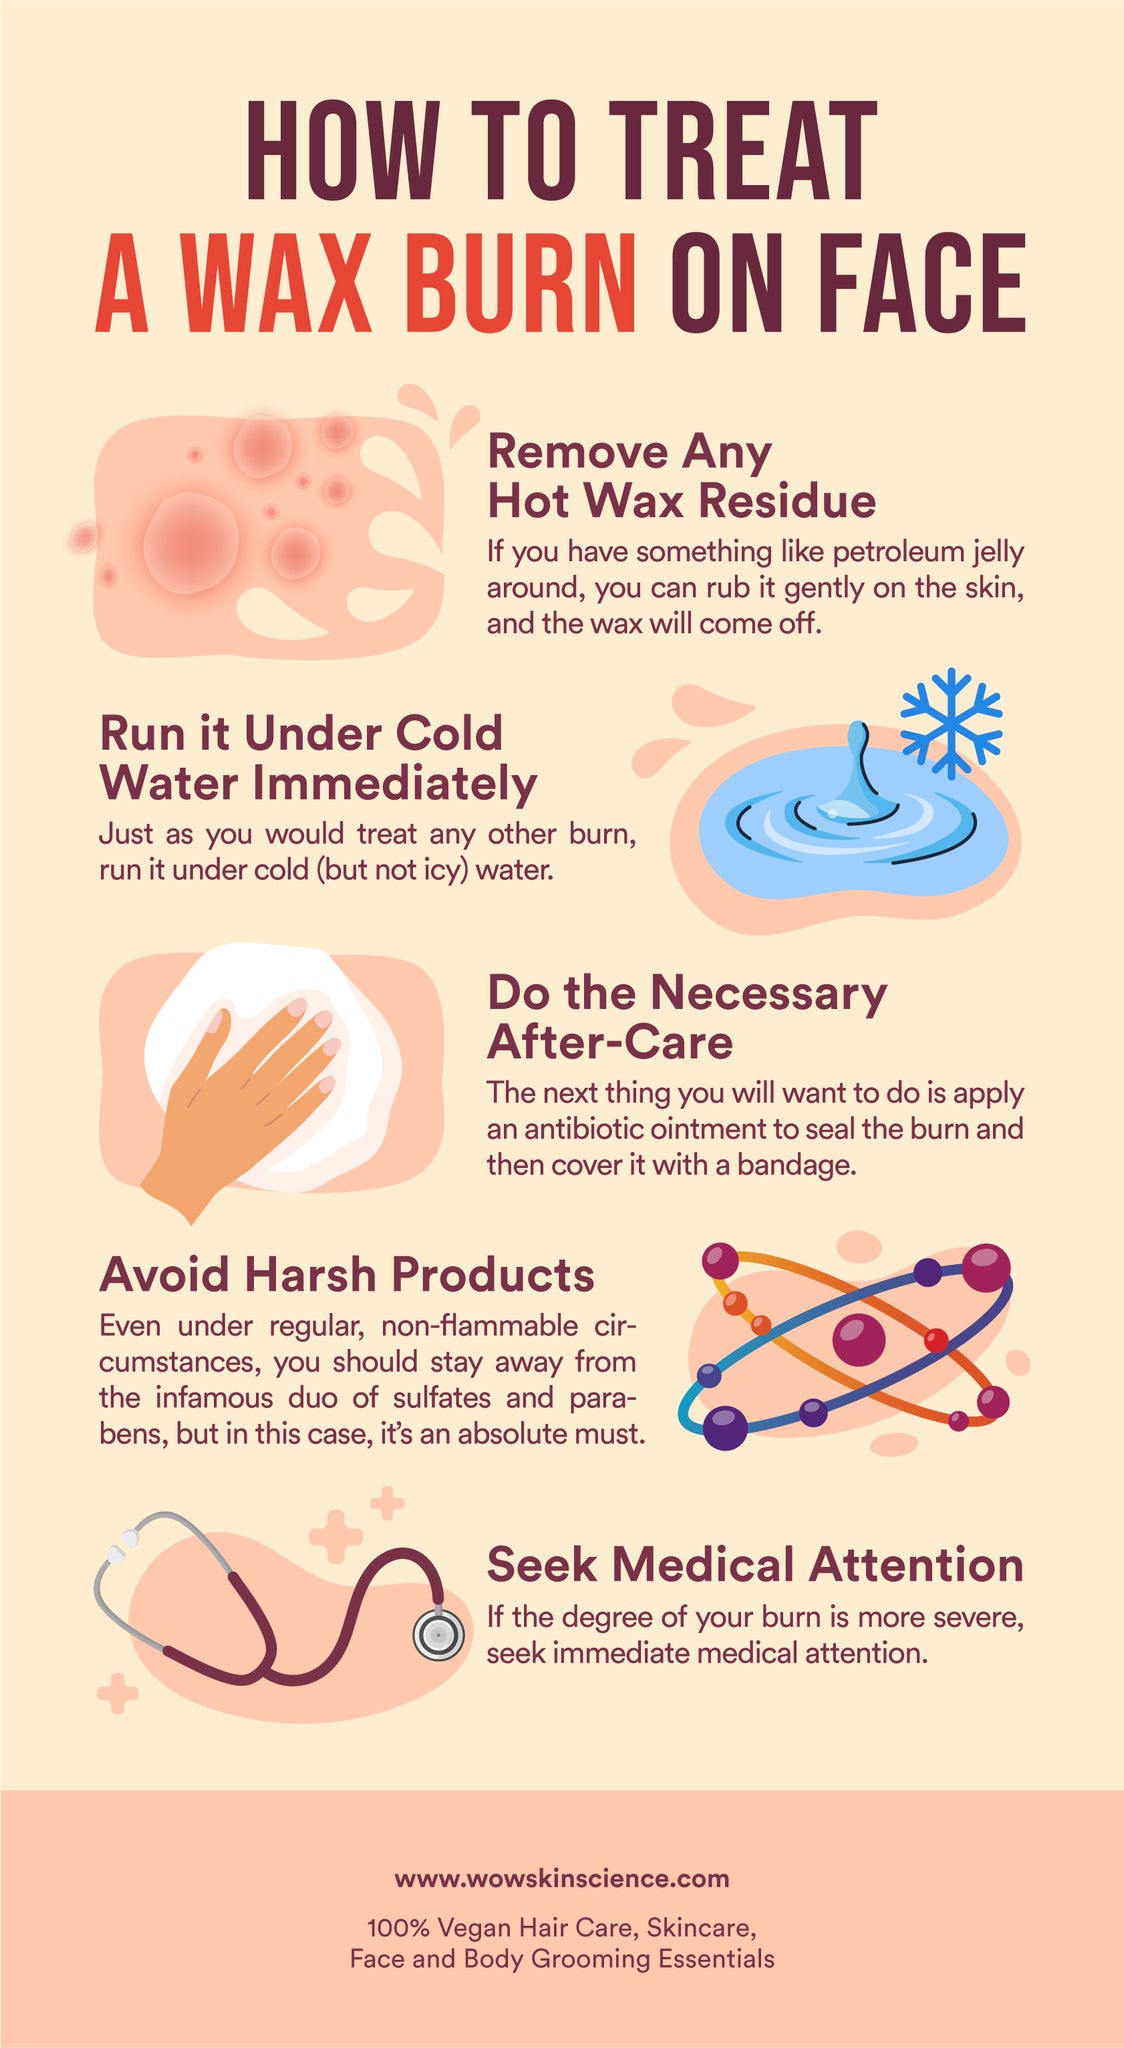 Got a Wax Burn on Face? Here is How to Heal the Damage!